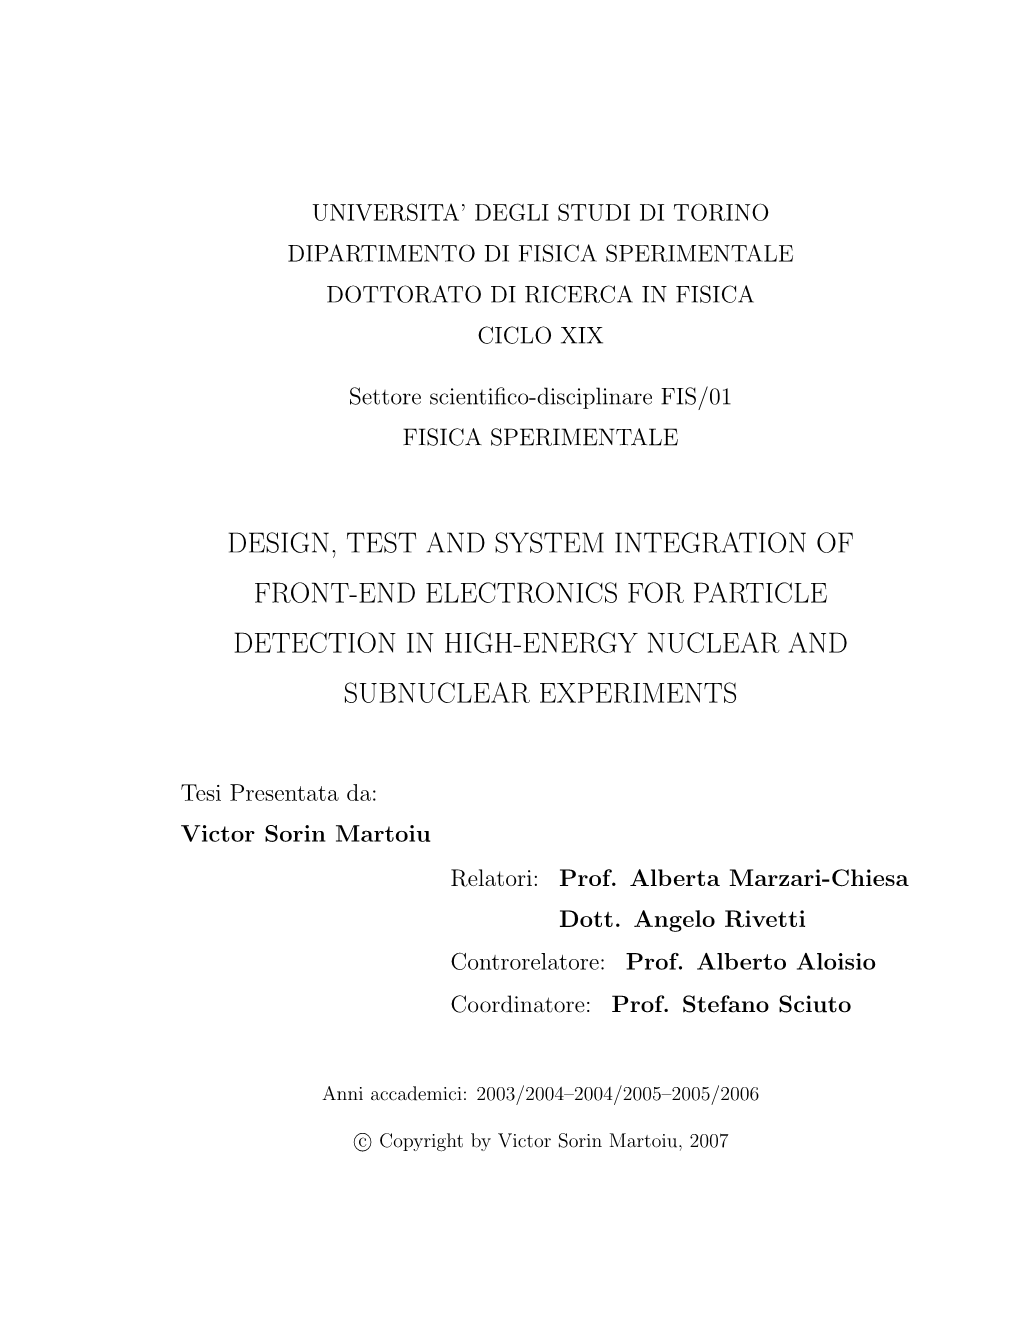 Design, Test and System Integration of Front-End Electronics for Particle Detection in High-Energy Nuclear and Subnuclear Experiments